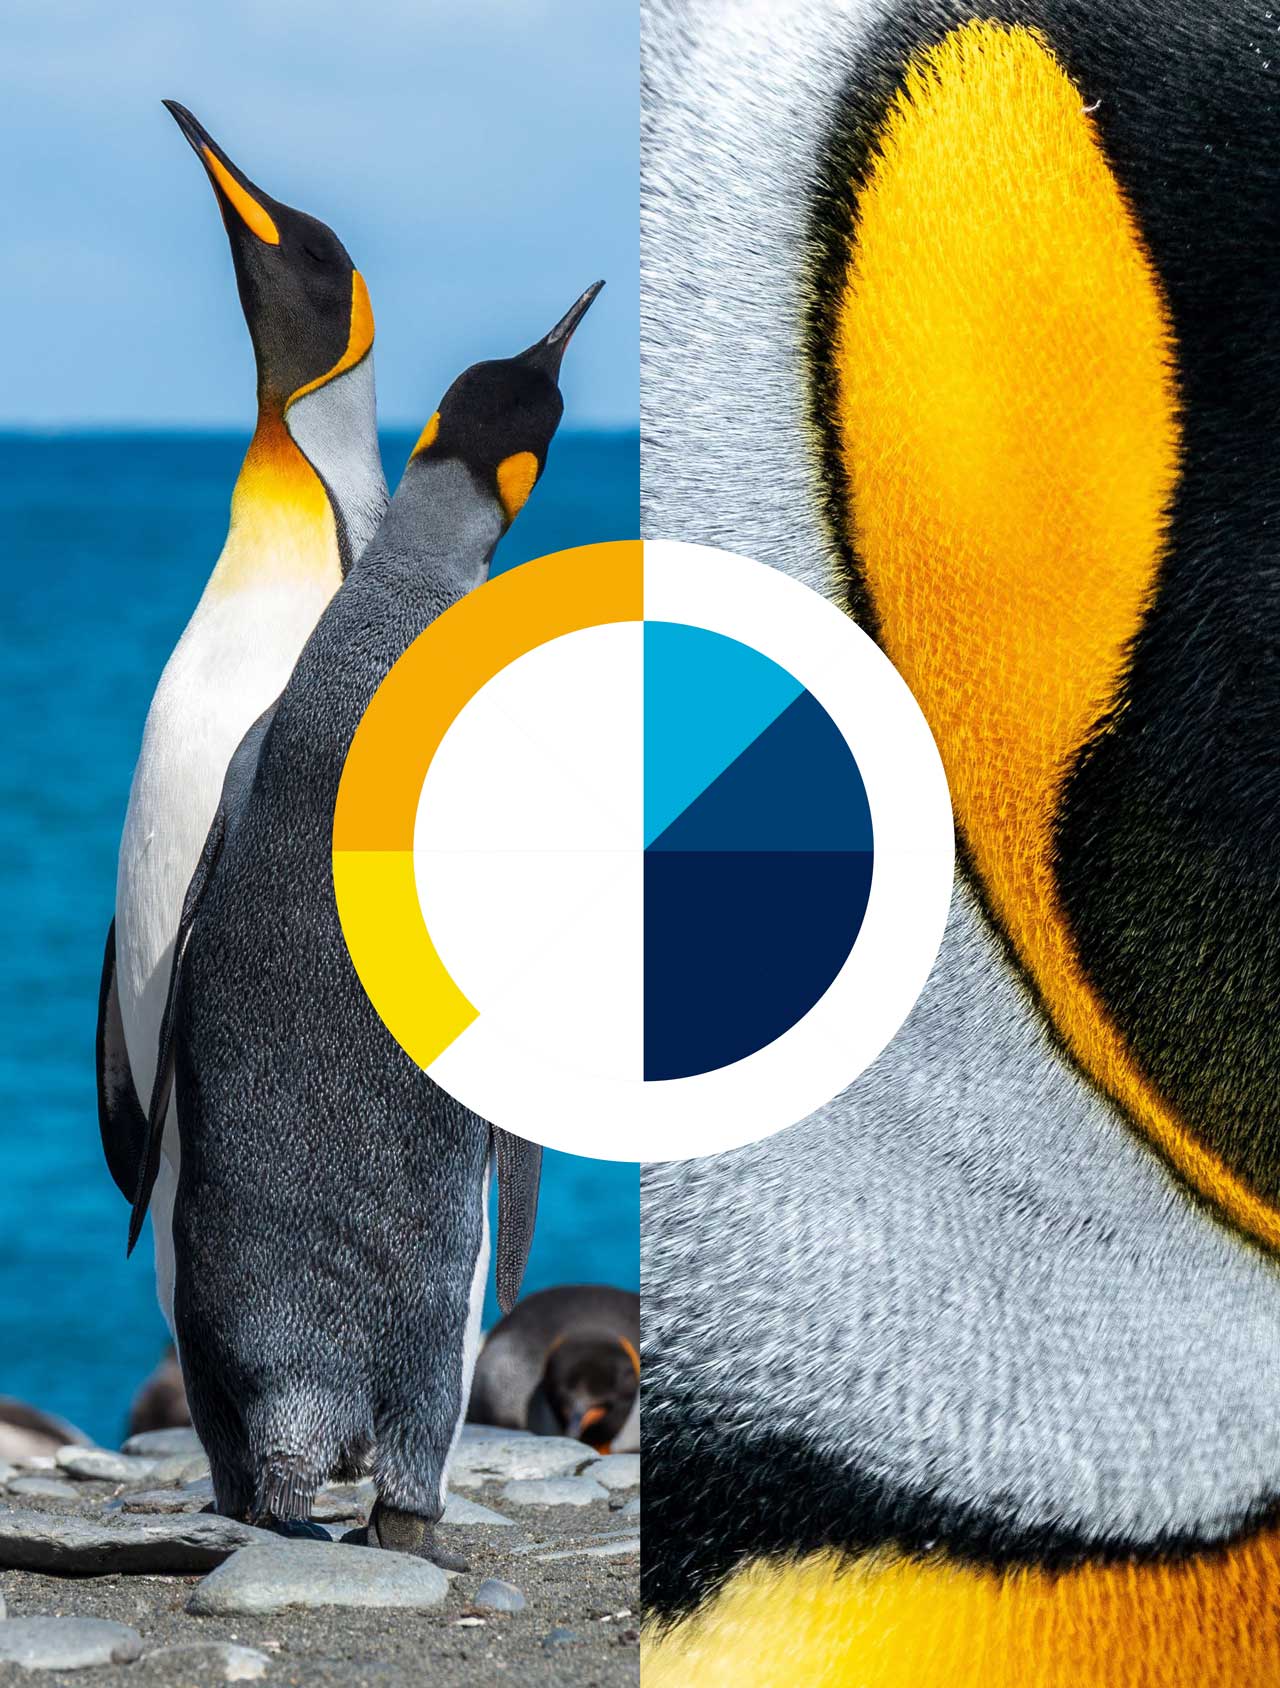 The brand colour palette overlayed imagery of penguins